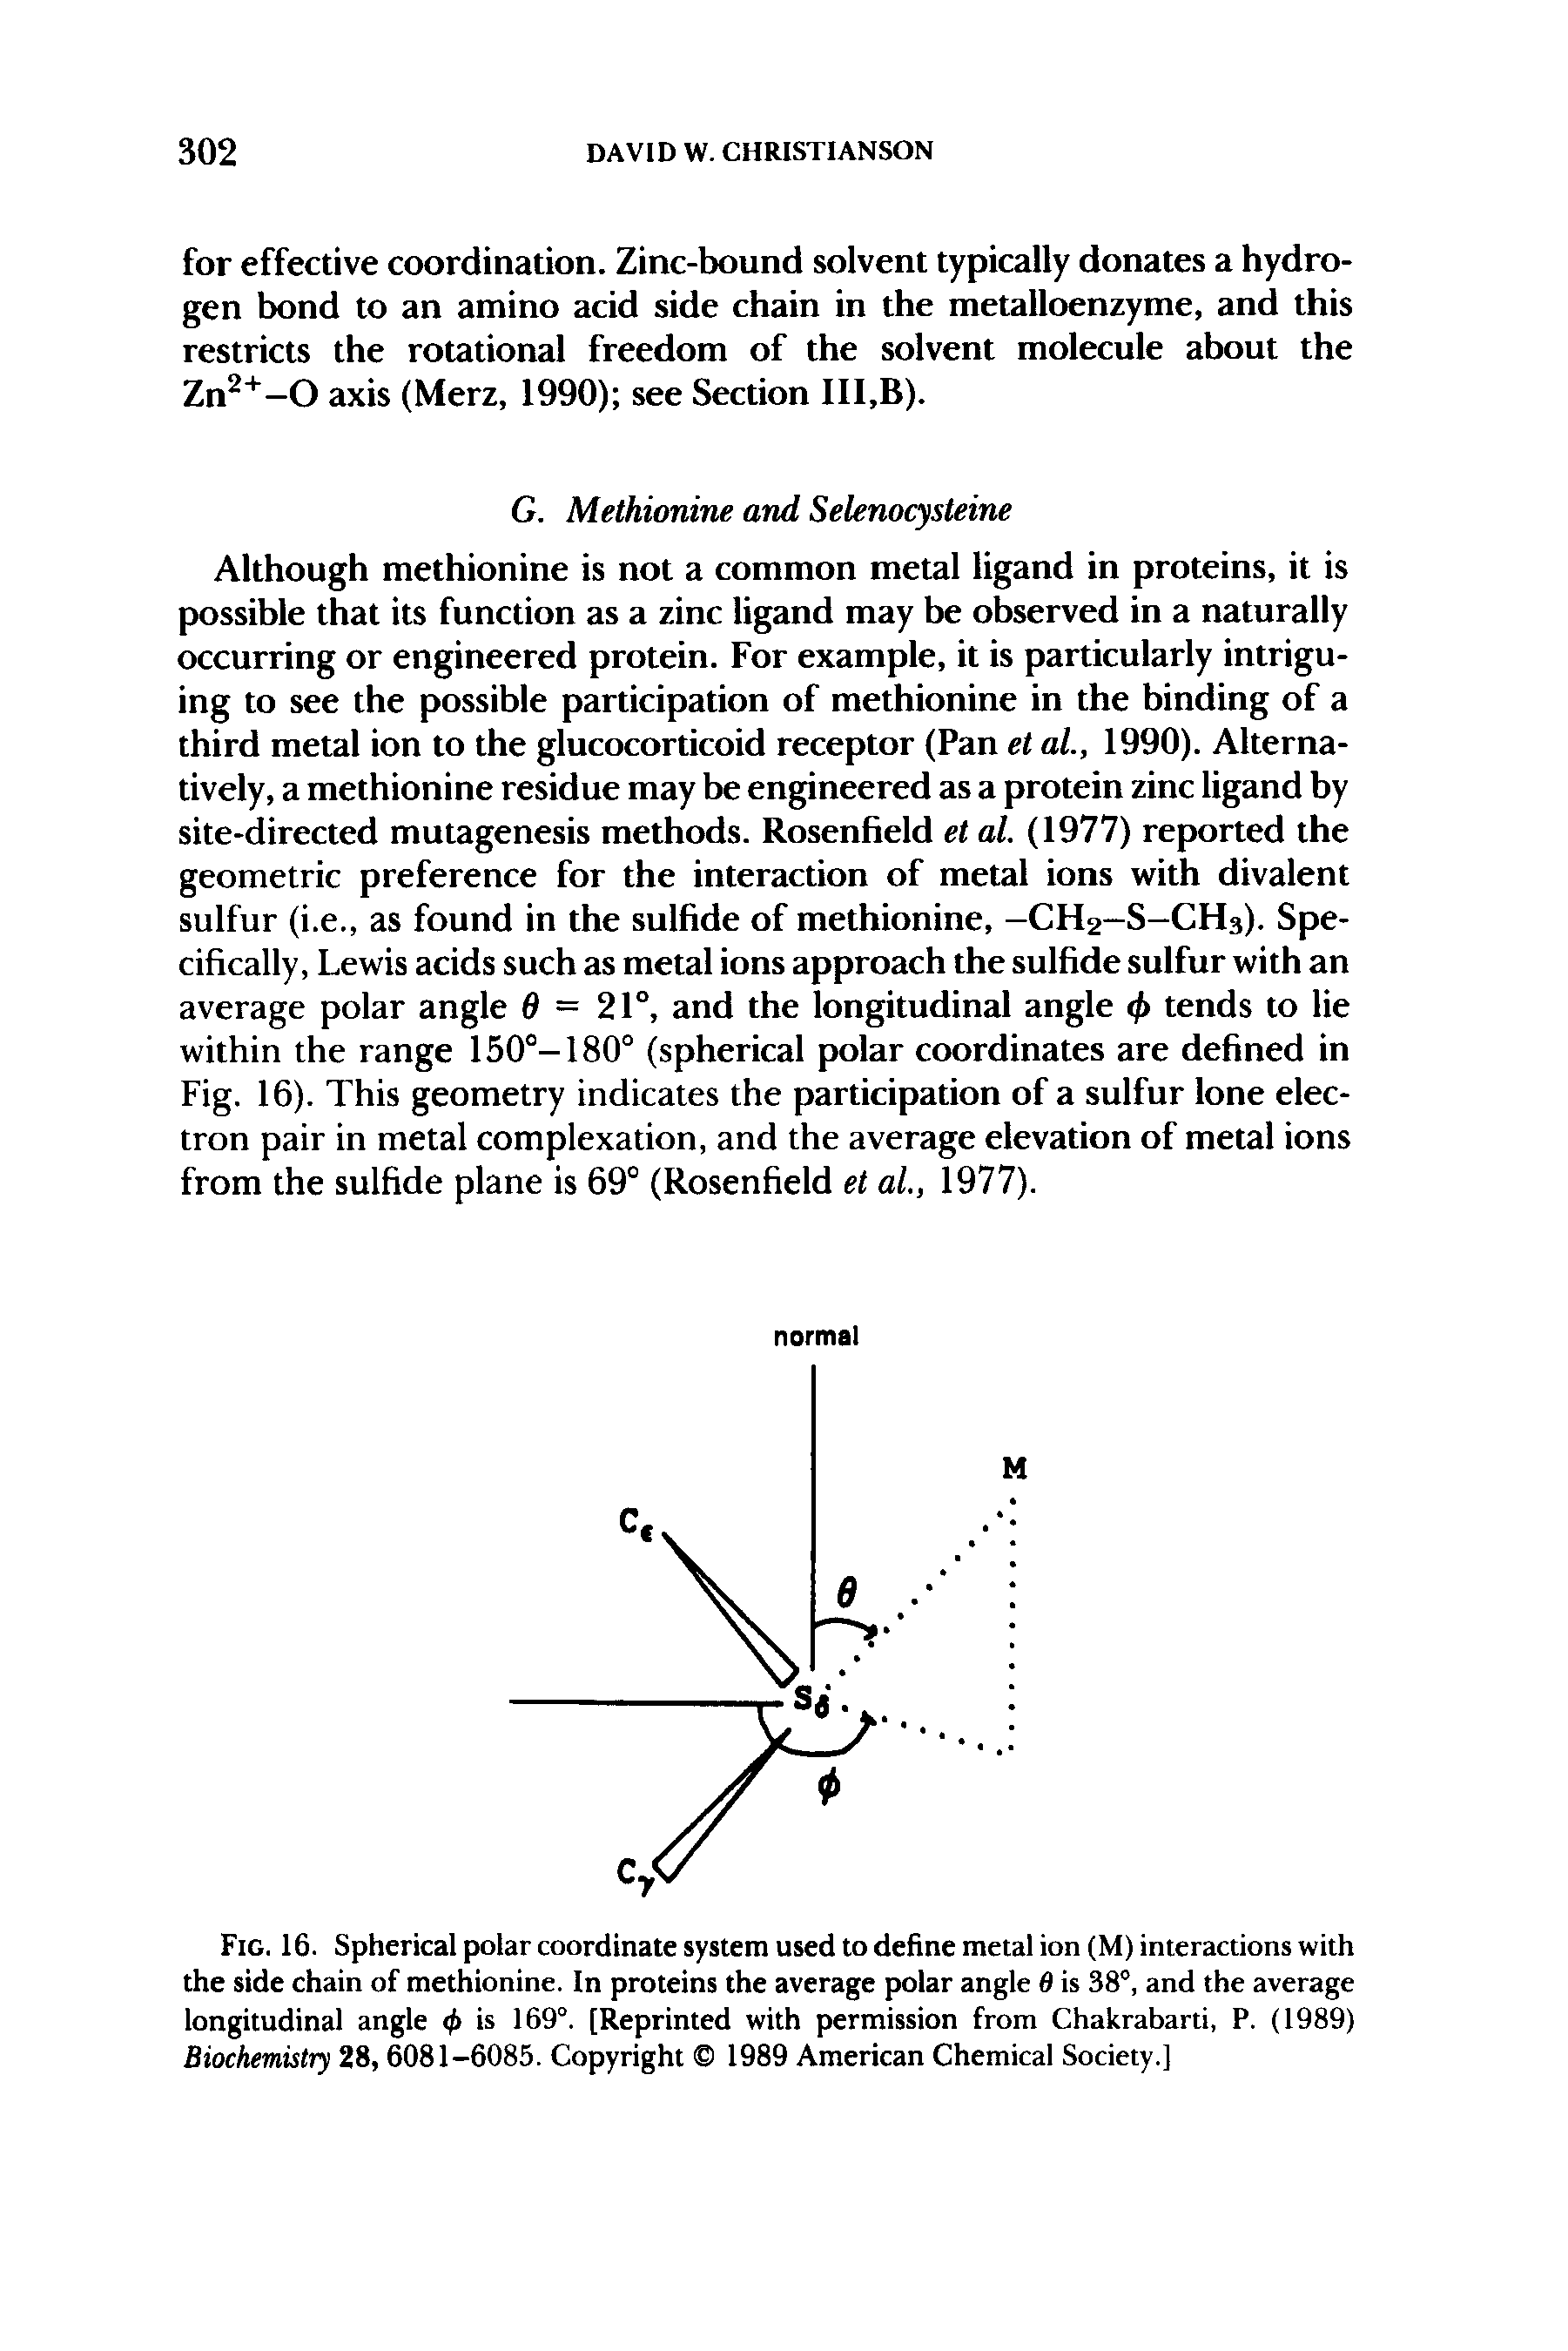 Fig. 16. Spherical polar coordinate system used to define metal ion (M) interactions with the side chain of methionine. In proteins the average polar angle d is 38°, and the average longitudinal angle <j> is 169°. [Reprinted with permission from Chakrabarti, P. (1989) Biochemistry 28, 6081-6085. Copyright 1989 American Chemical Society.]...